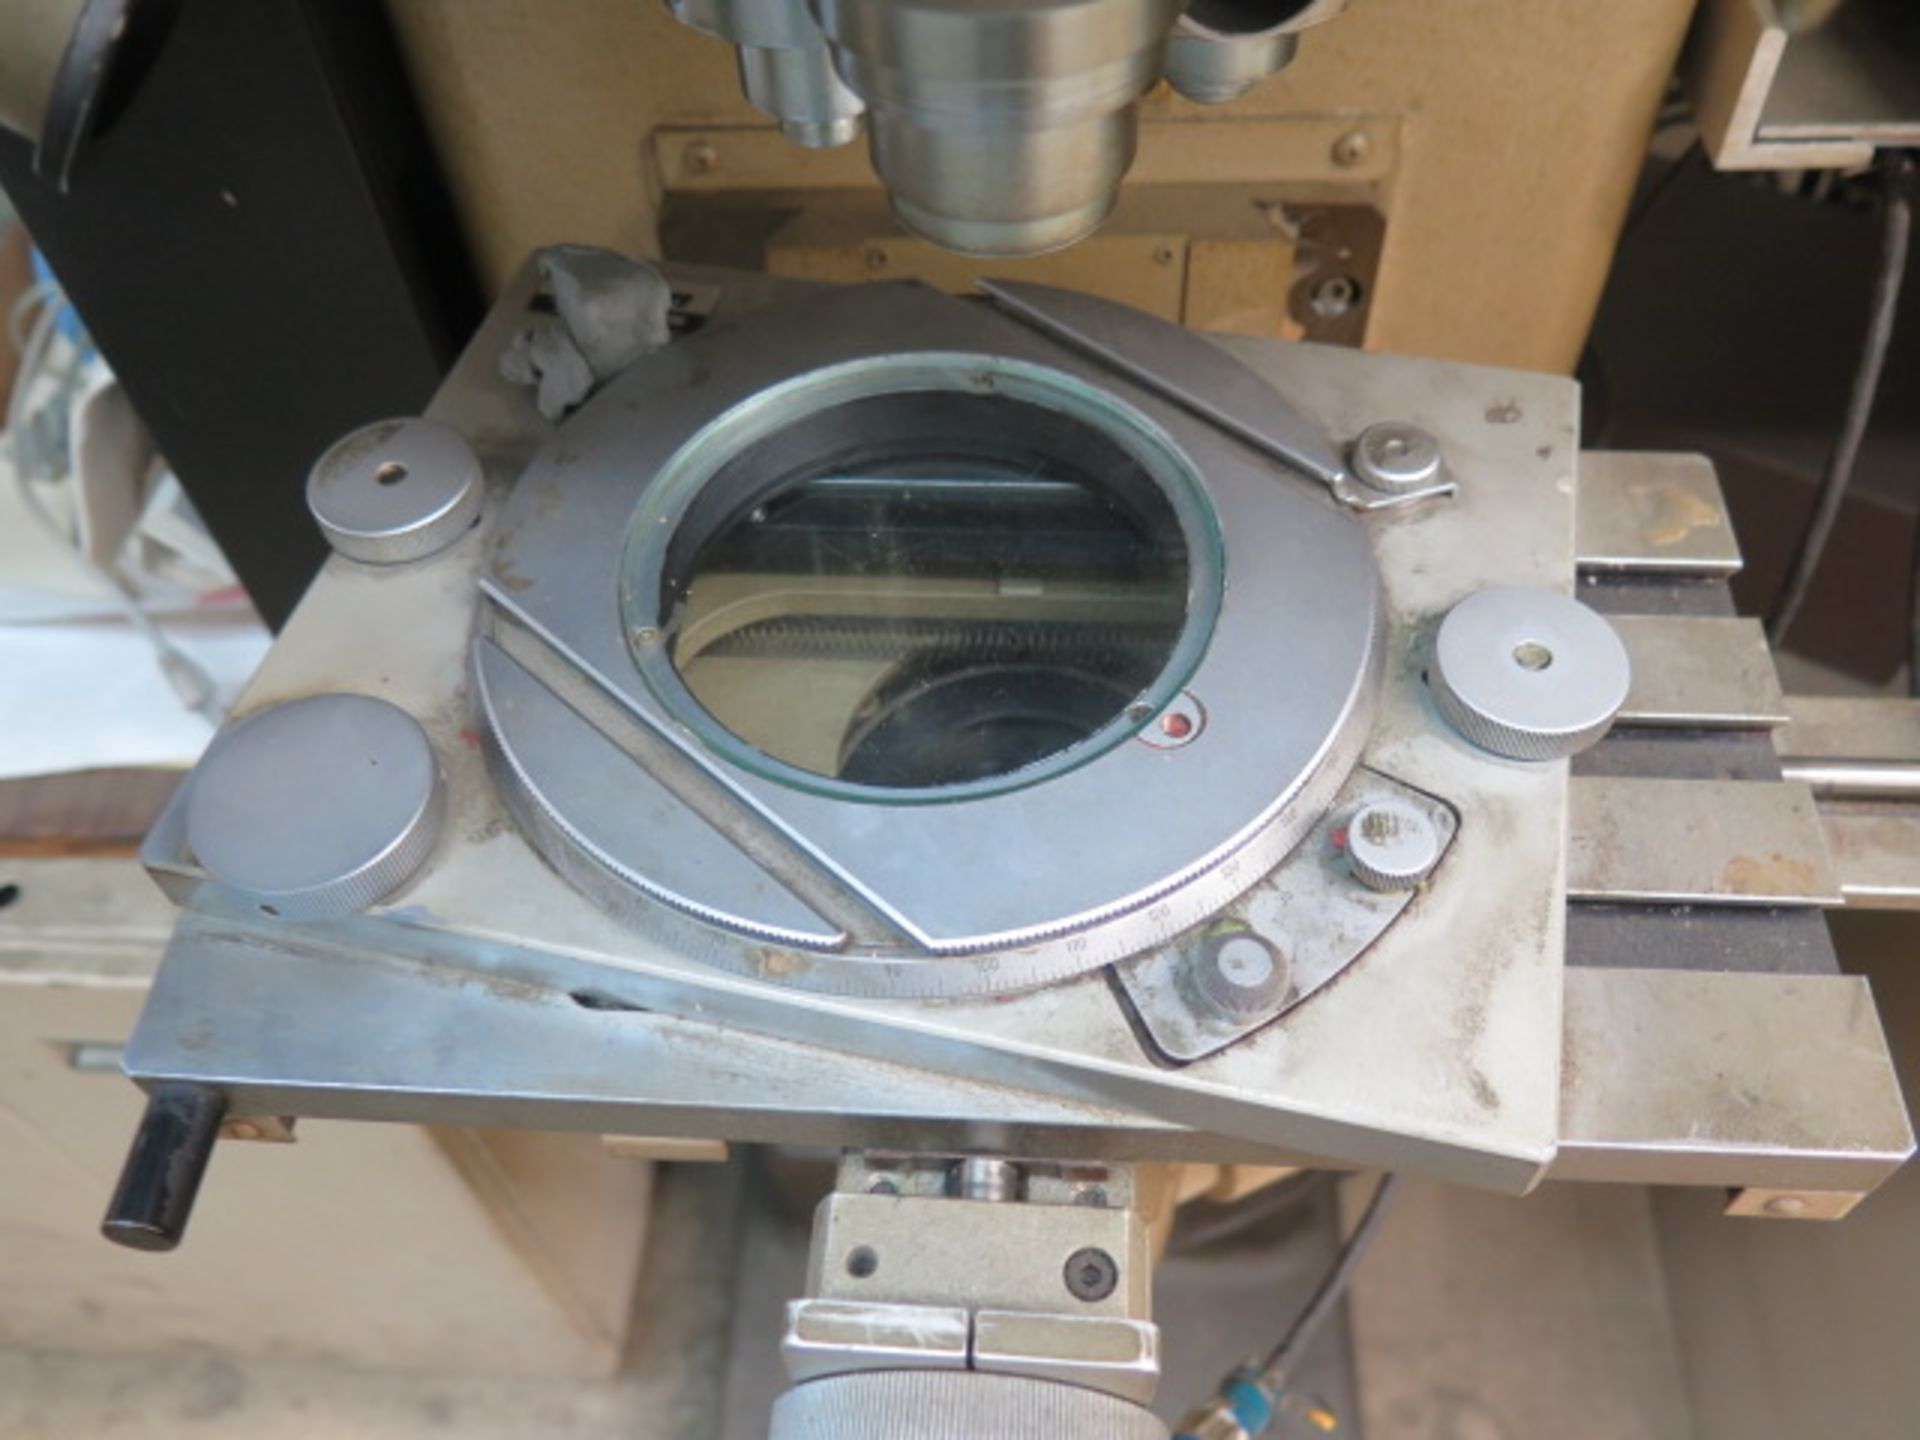 Nikon mdl. V-14 14" Optical Comparator s/n 36698 w/ Autometronics DRO, 20X, 50X and 300X, SOLD AS IS - Image 11 of 13